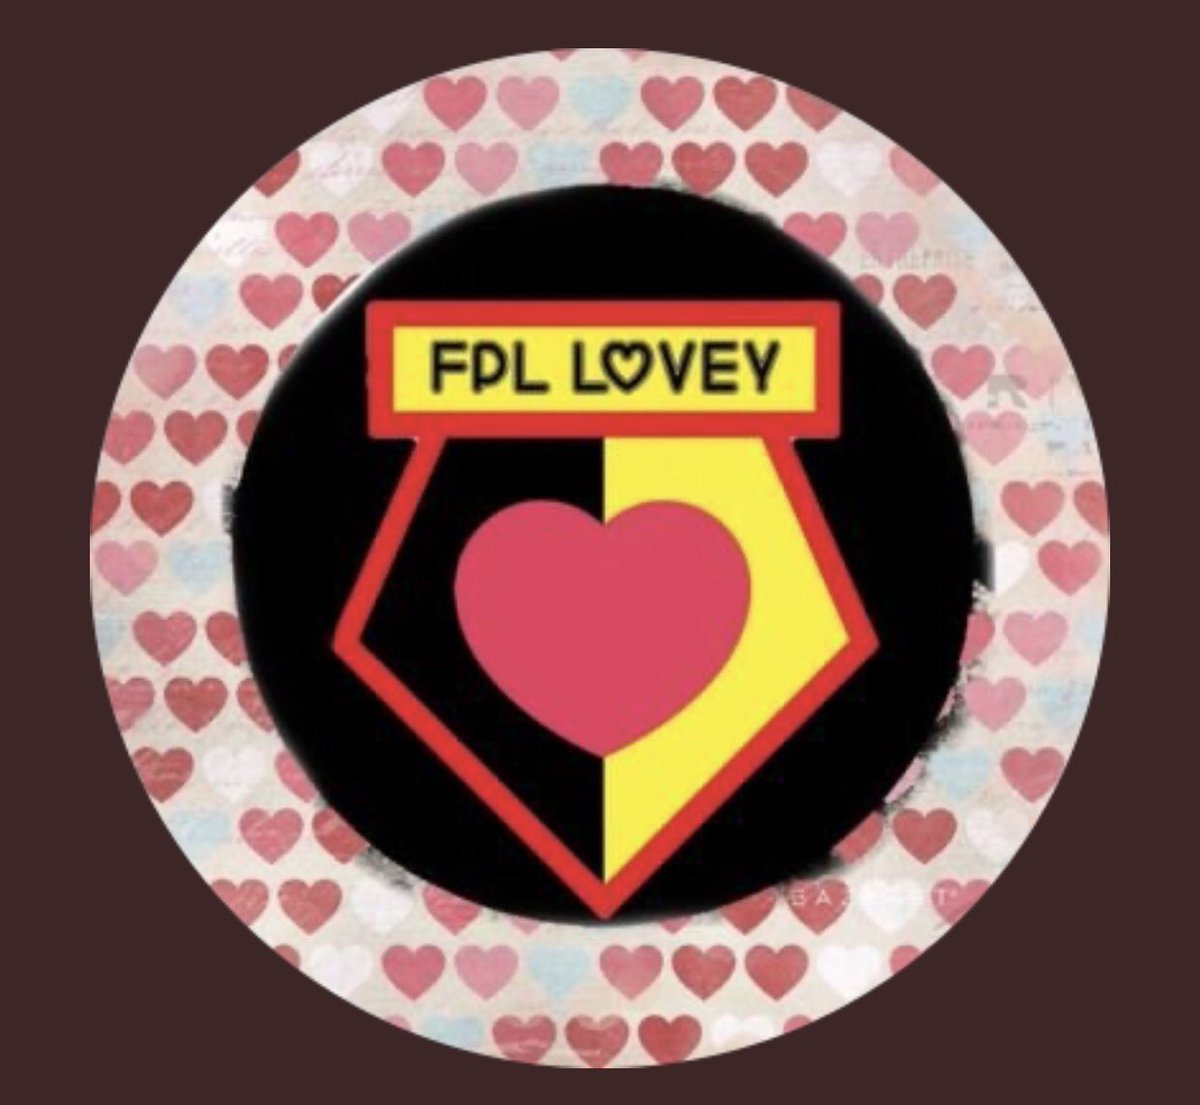  @FplLovey Original member / & regular Wolfpod guest!As he’s name suggests, the nicest guy on twitter! Has time for everyone!Even though he supports Watford  lovey is a proper football fan! Wearing he’s heart on his sleeve! A wolfpack great!Loves a bold captain punt